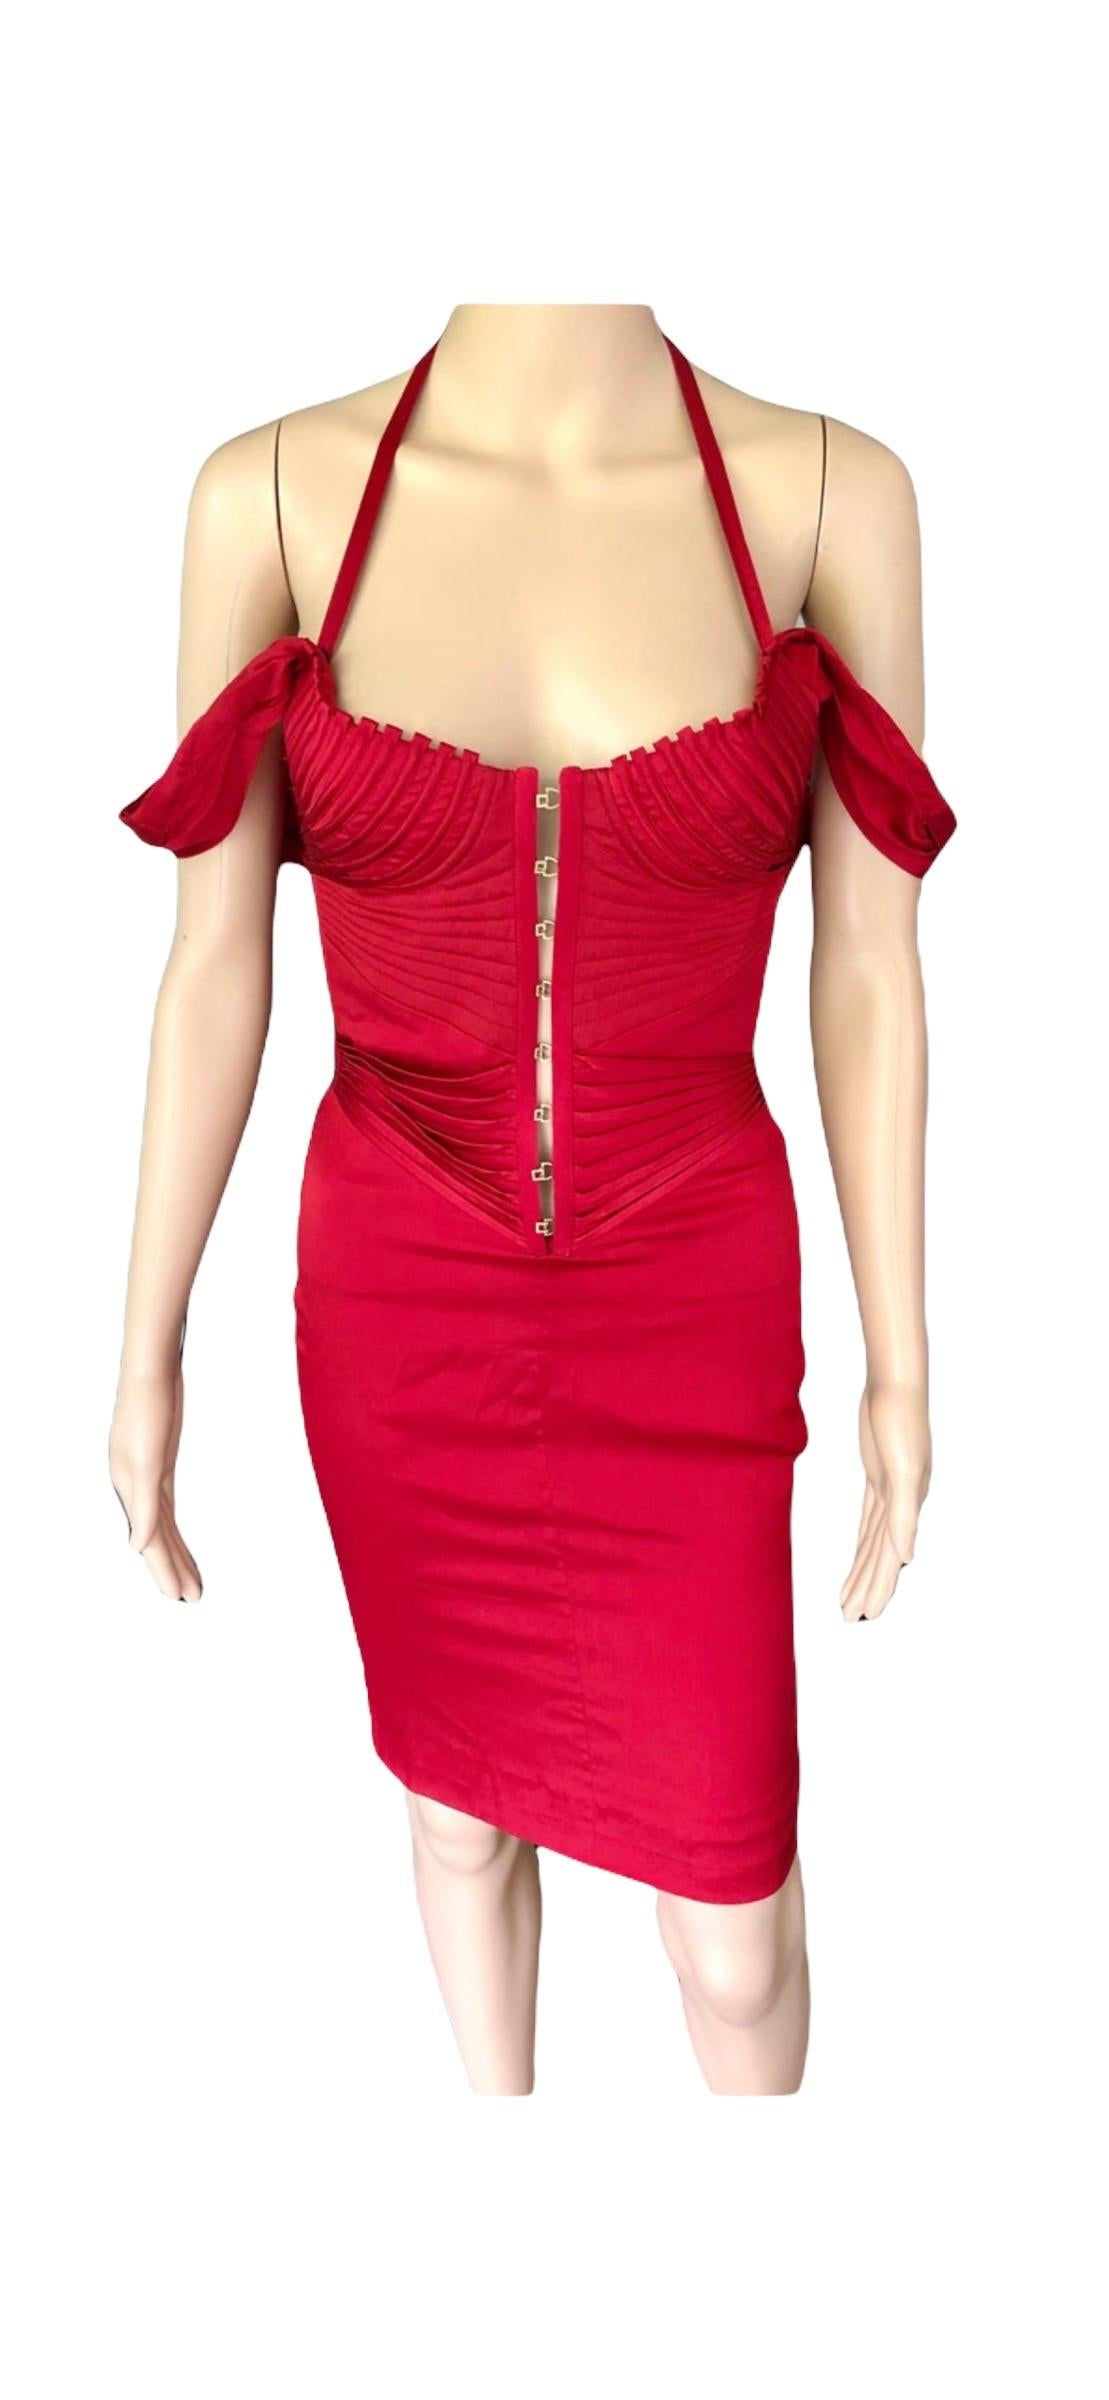 Tom Ford for Gucci F/W 2003 Runway Bustier Corset Silk Red Dress 2